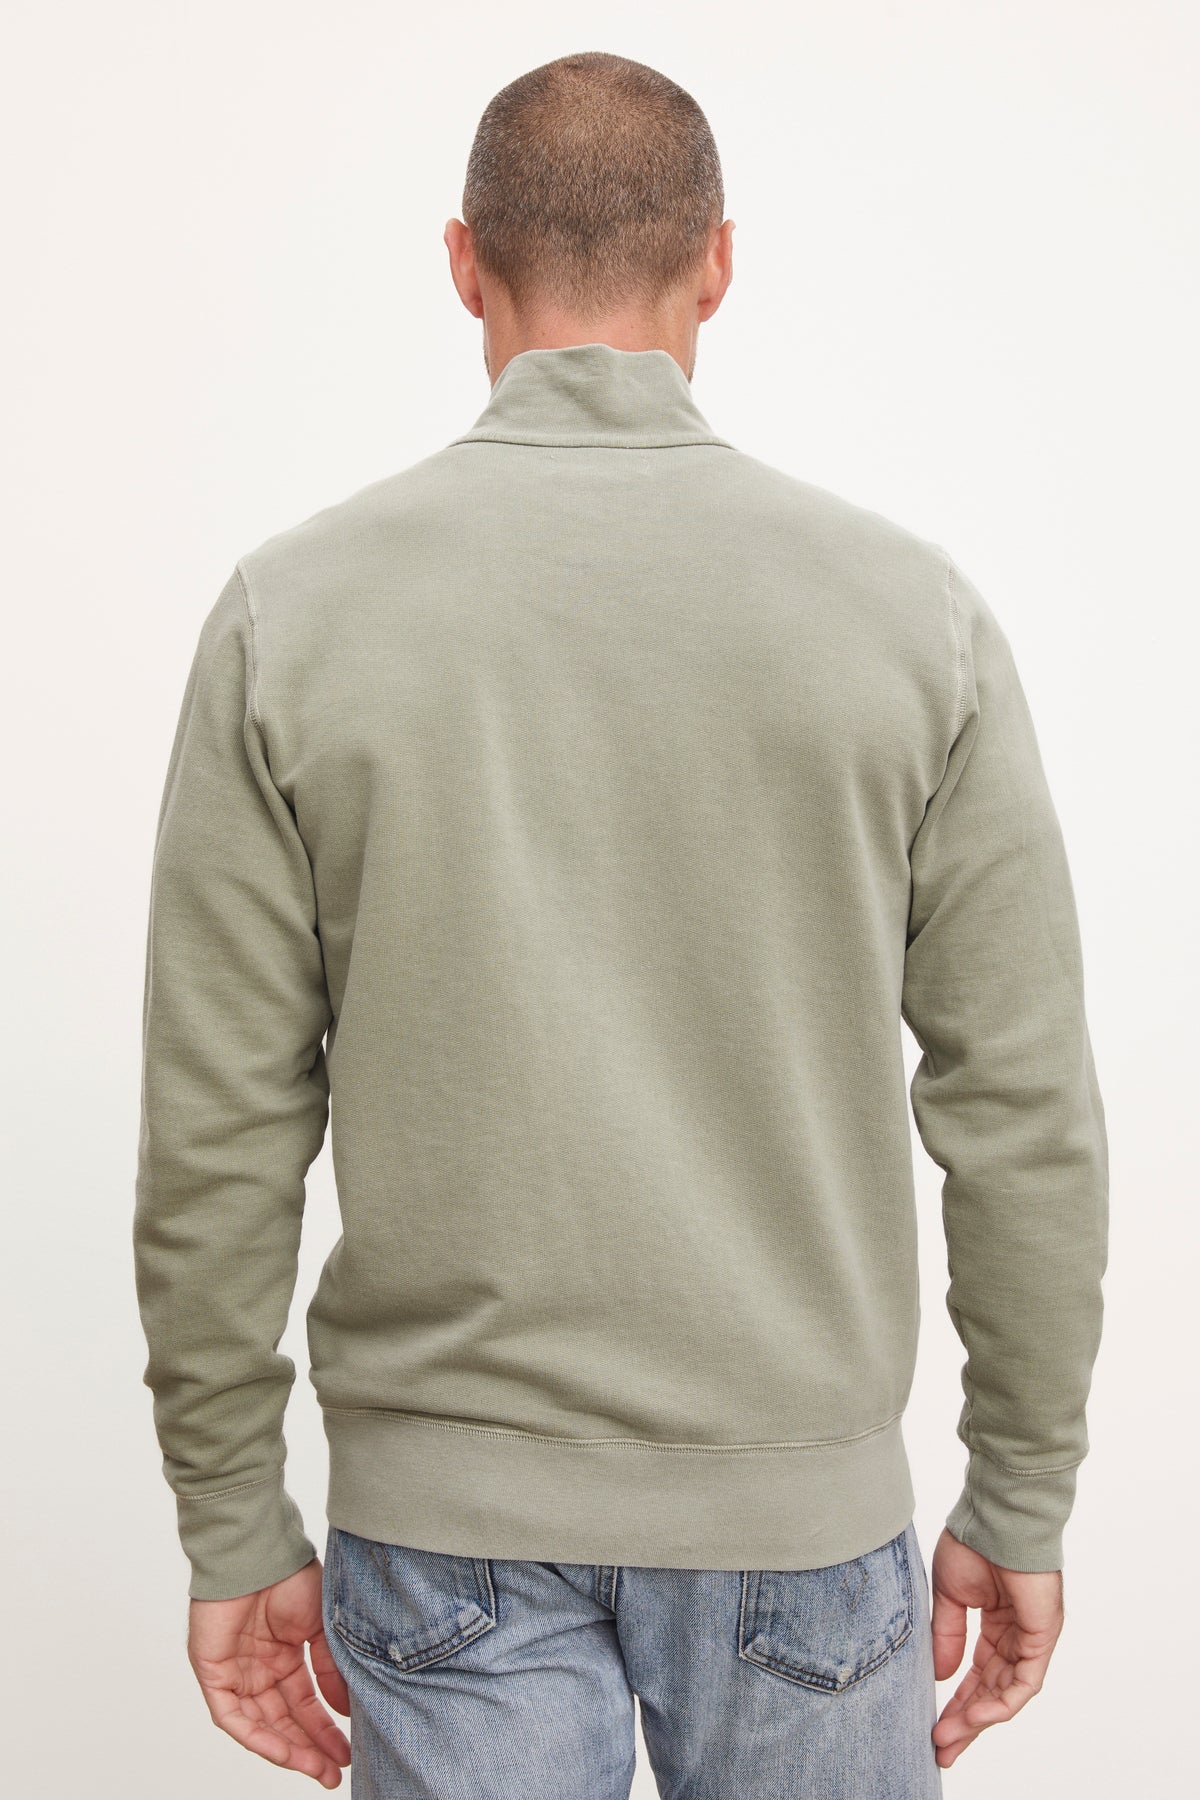 The back view of a man wearing a green Velvet by Graham & Spencer TERRY FRENCH TERRY FULL-ZIP sweatshirt.-36008992768193